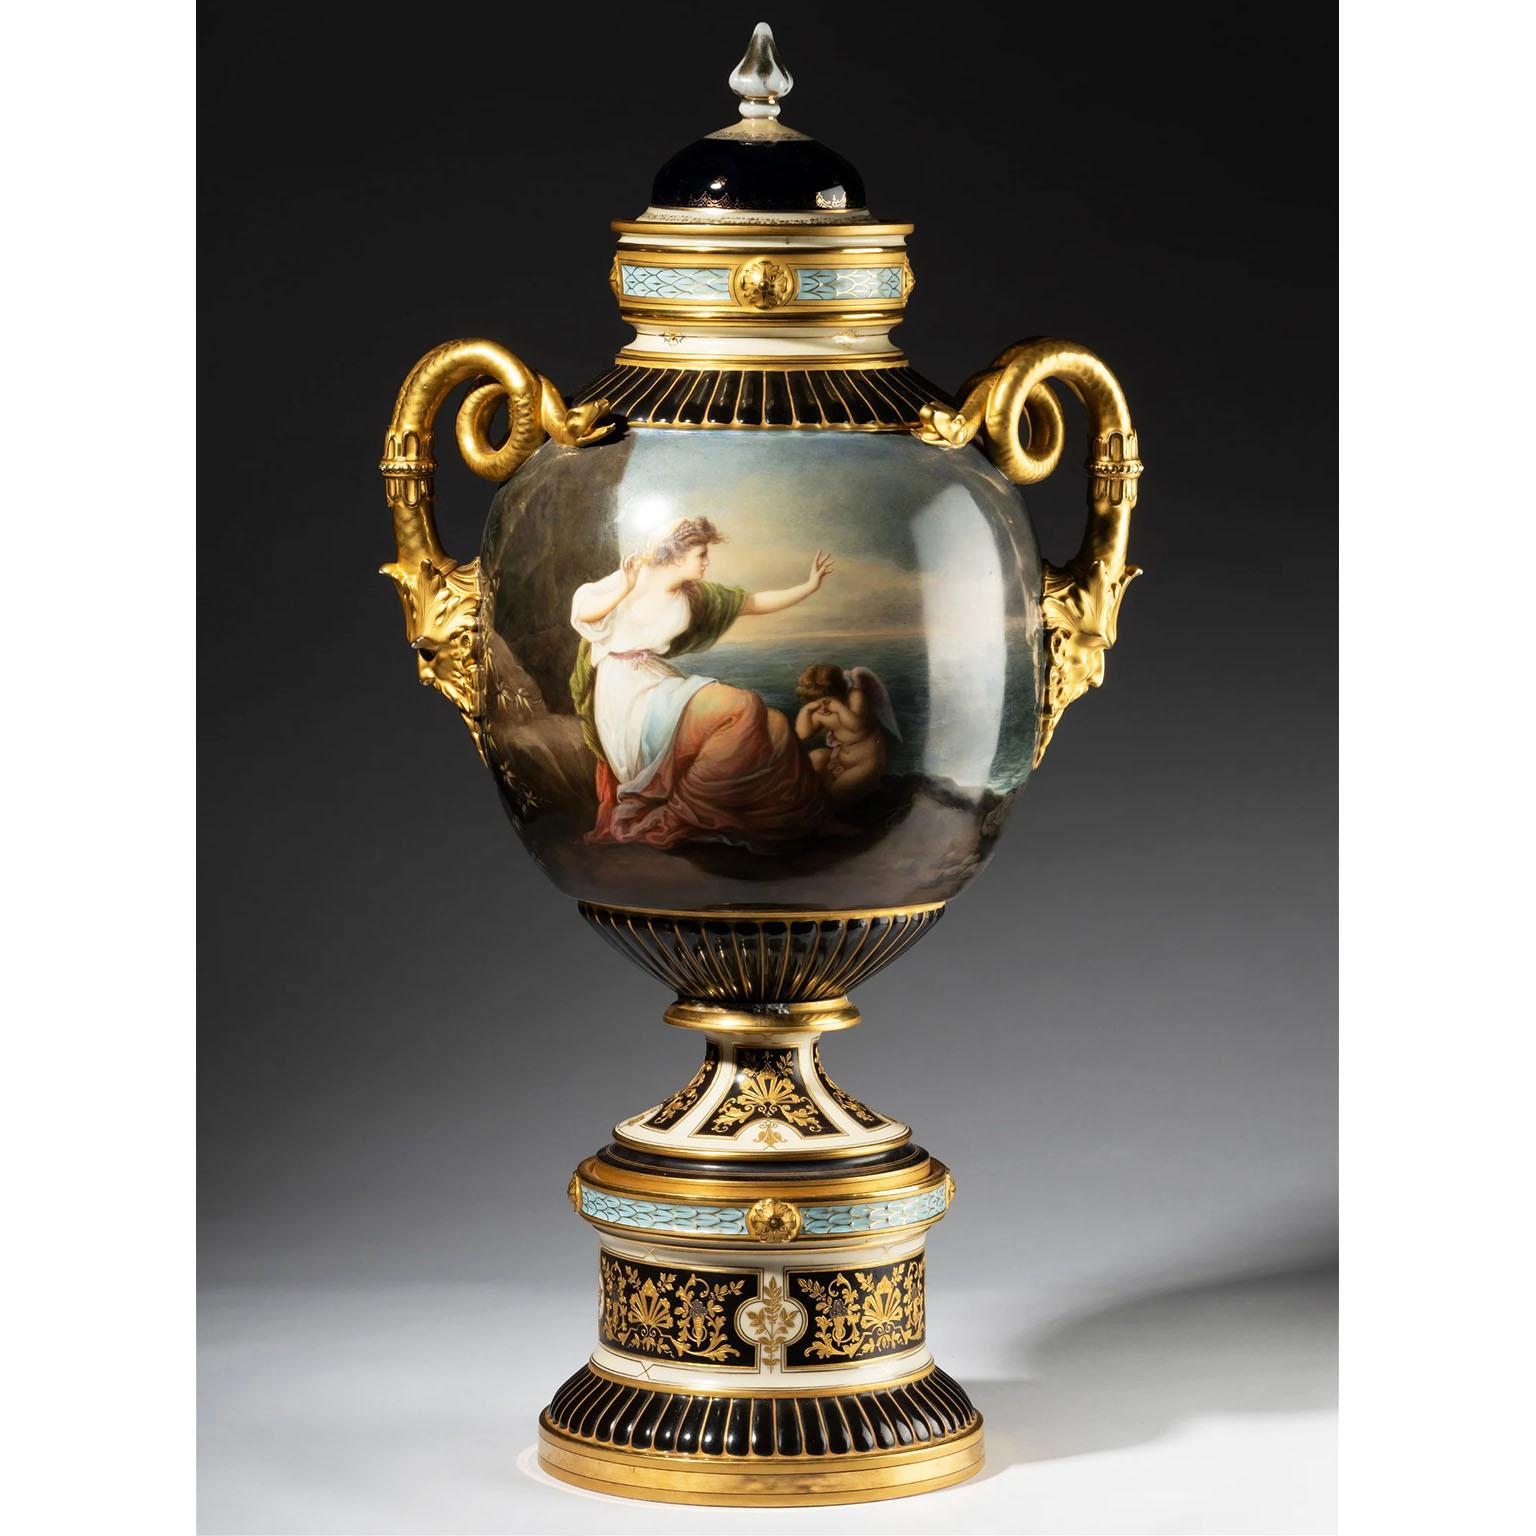 A Very Fine and Impressive Bohemian 19th Century Vienna-Style Neoclassical Revival Style Pirkenhammer Porcelain Vase - Urn. The ovoid shaped finely painted all around body with allegorical scenes representing 'The Search for Love', with one side